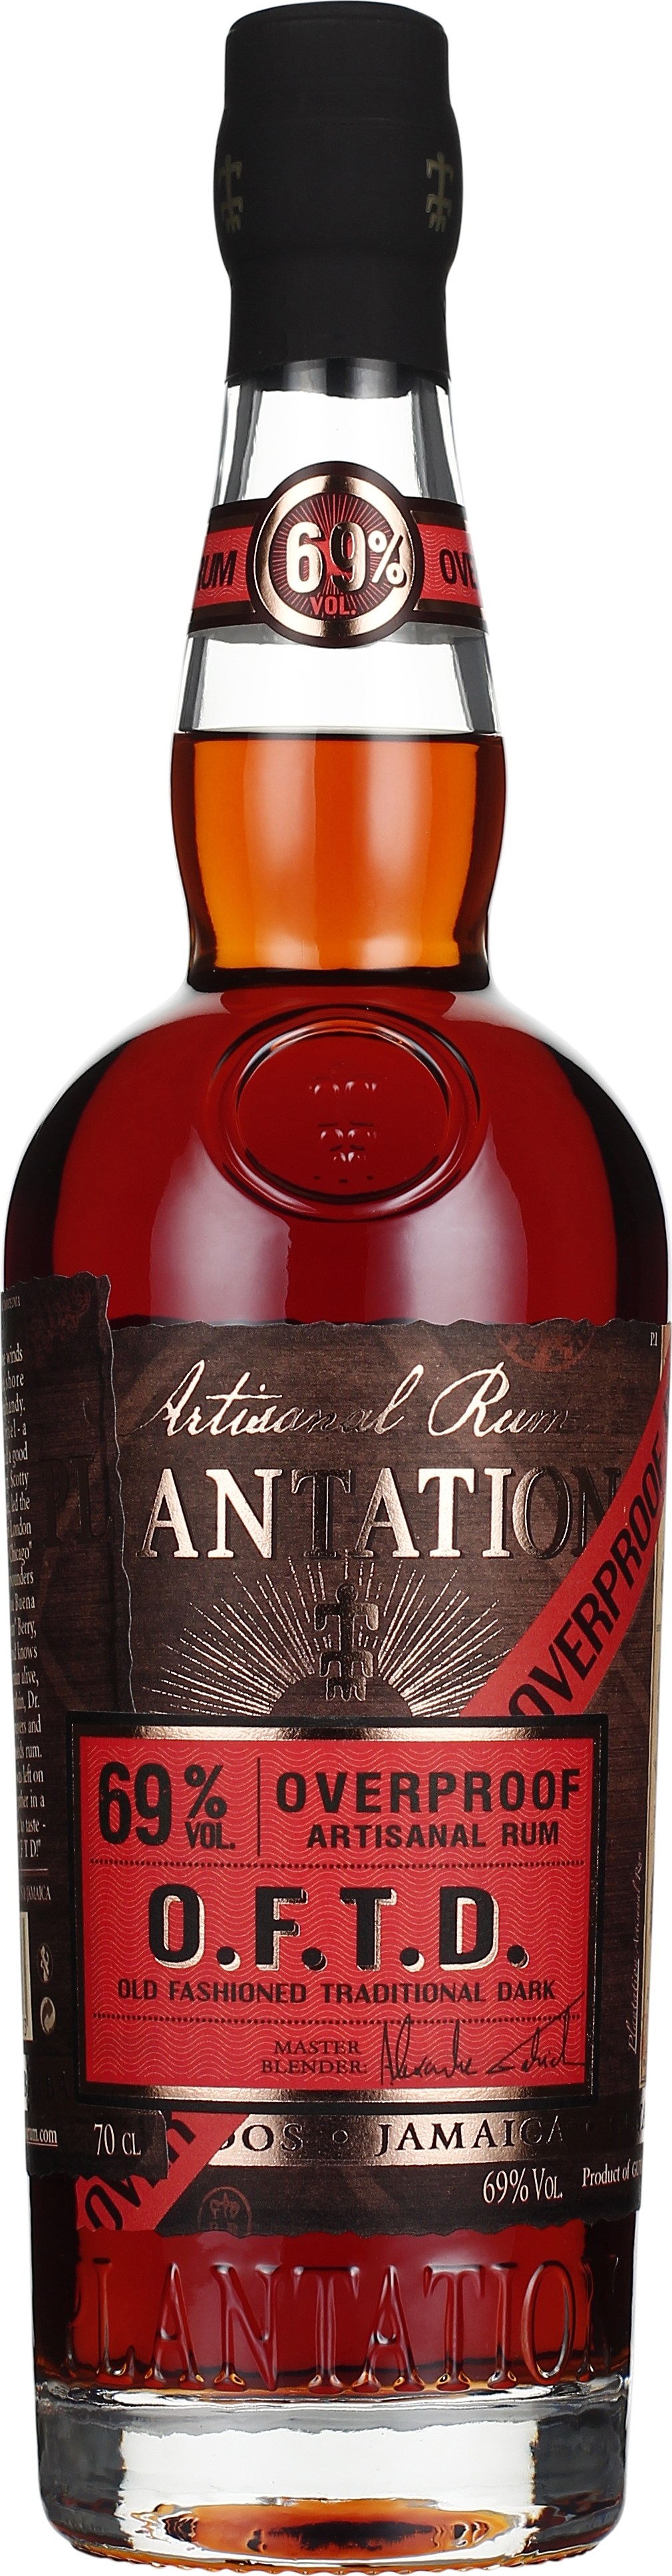 Plantation Old Fashioned Traditional Dark Overproof 70CL